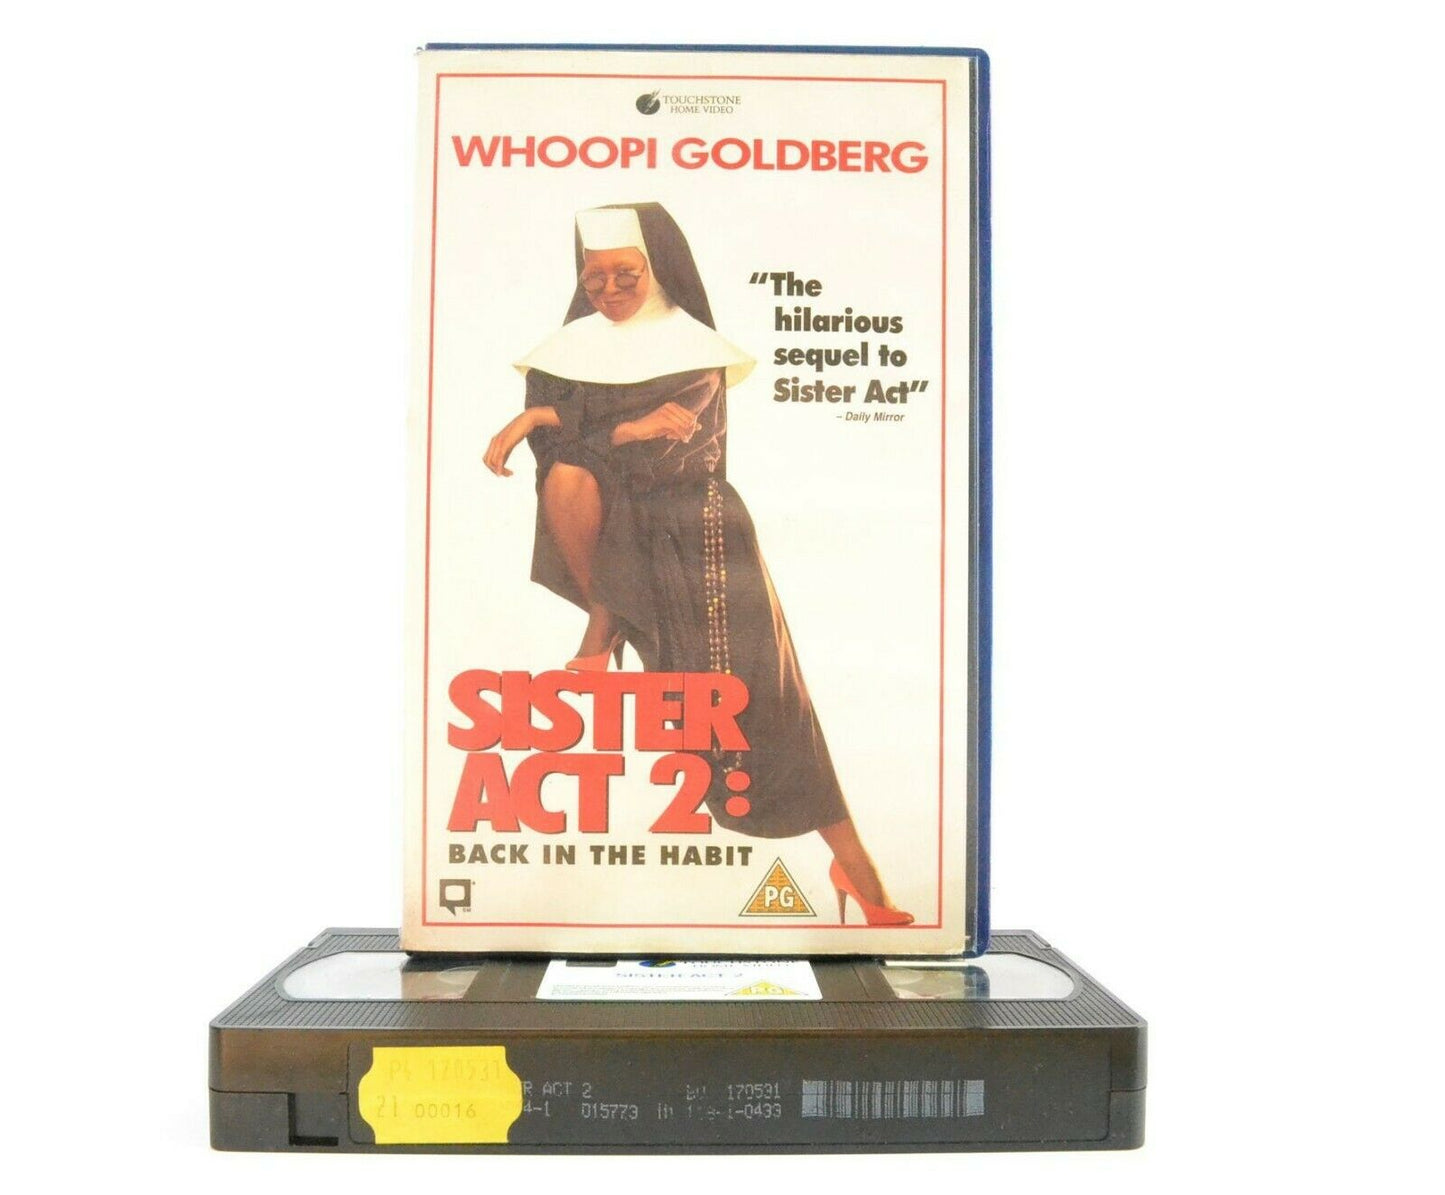 Sister Act 2: Back In The Habit - Large Box - Sister With Bad Habit - Pal VHS-